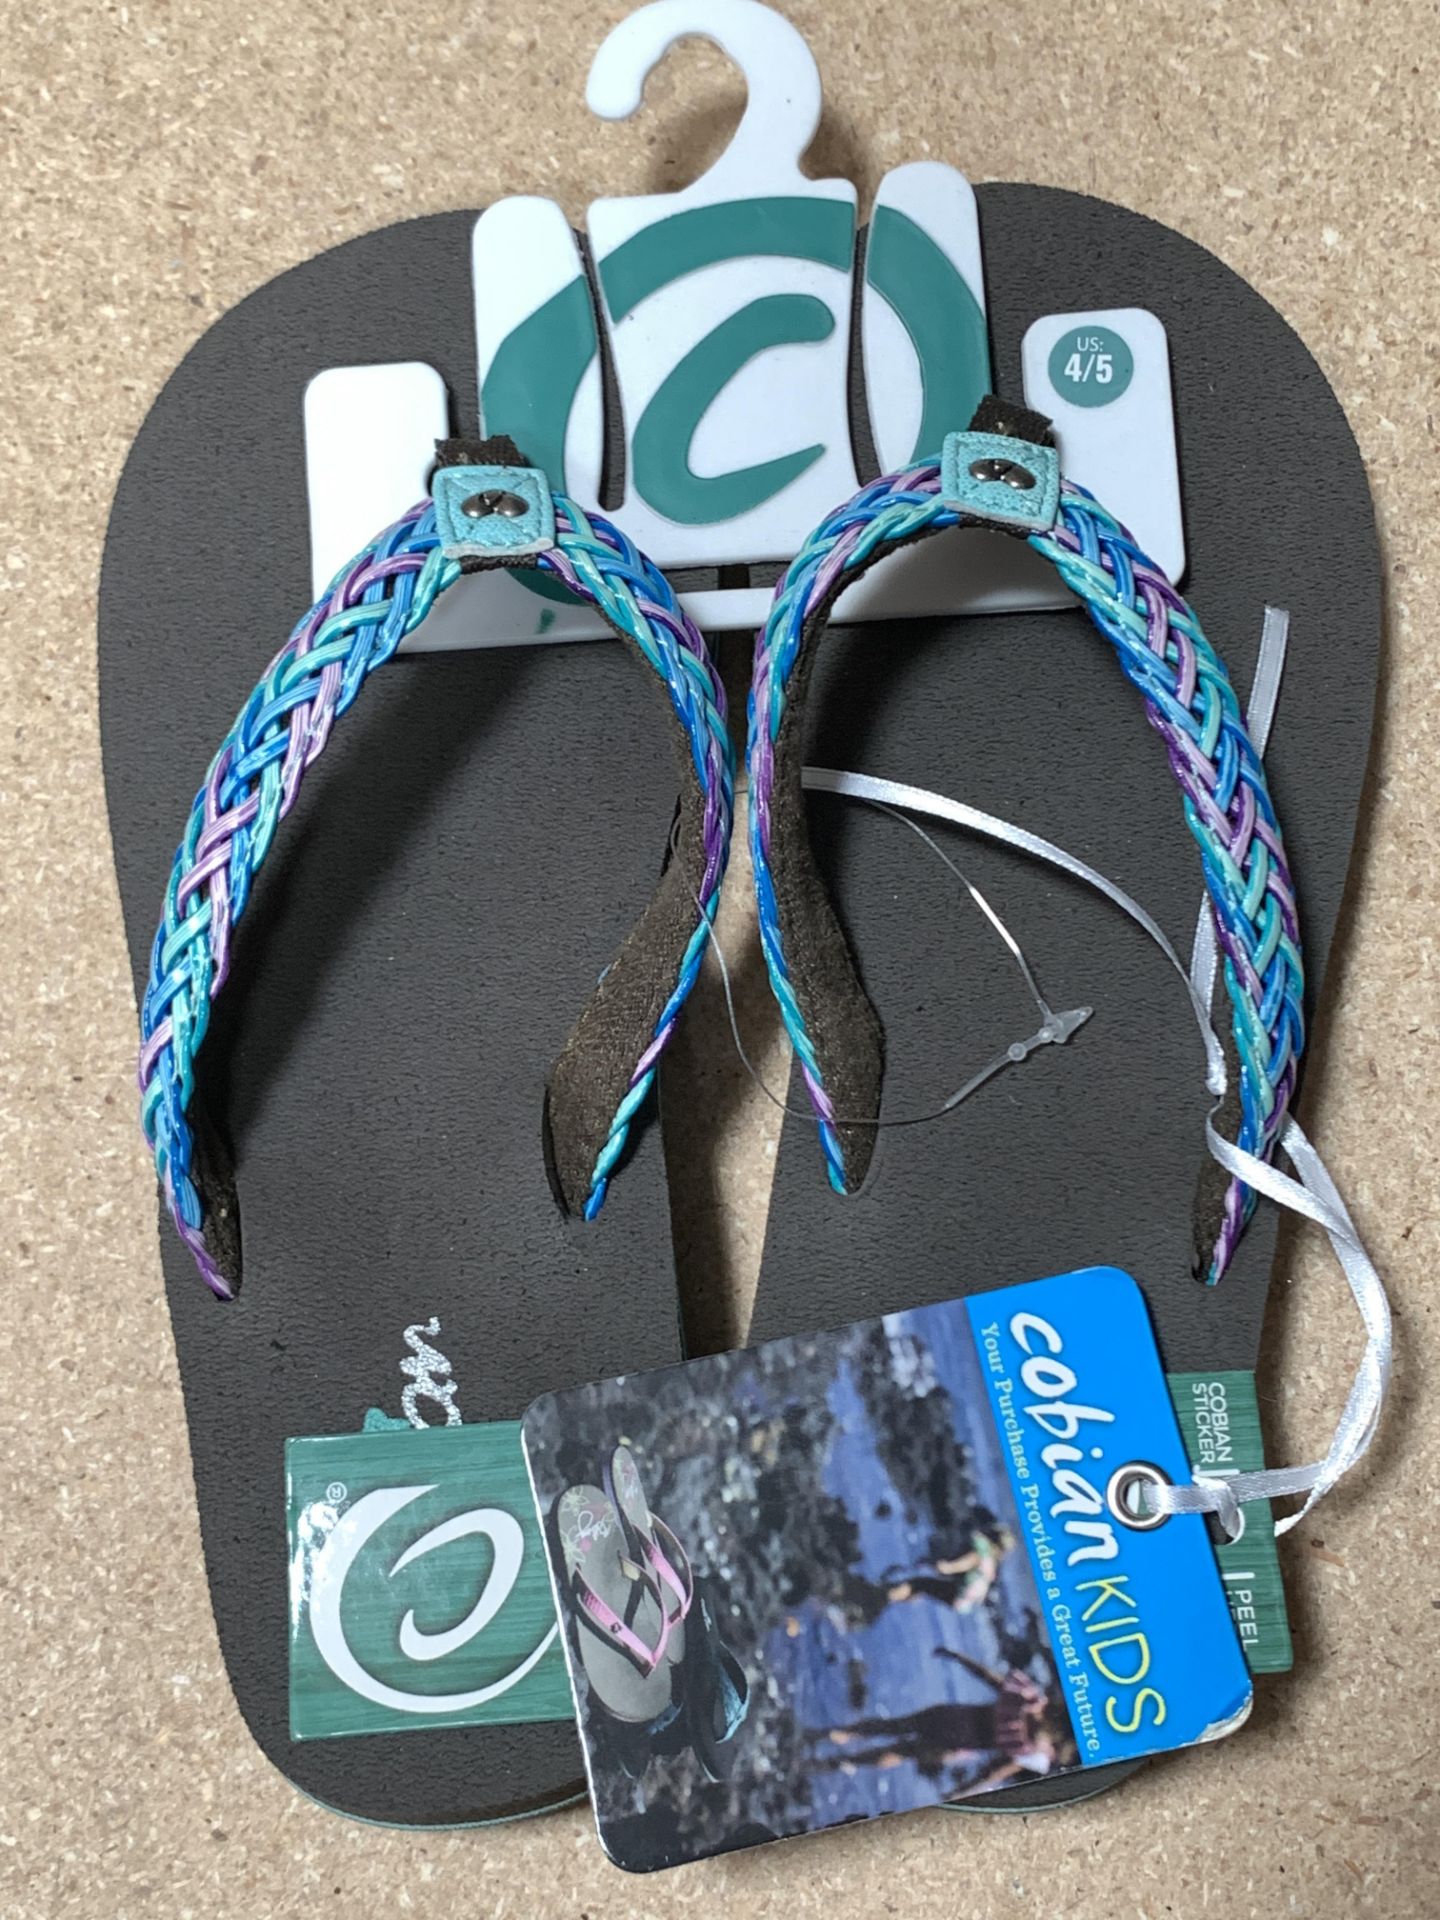 10 Pairs Cobian Kids Flip Flop Sandals, Lil Shimmer &Lil Lalati, New, Various Sizes (Retail $240) - Image 3 of 8